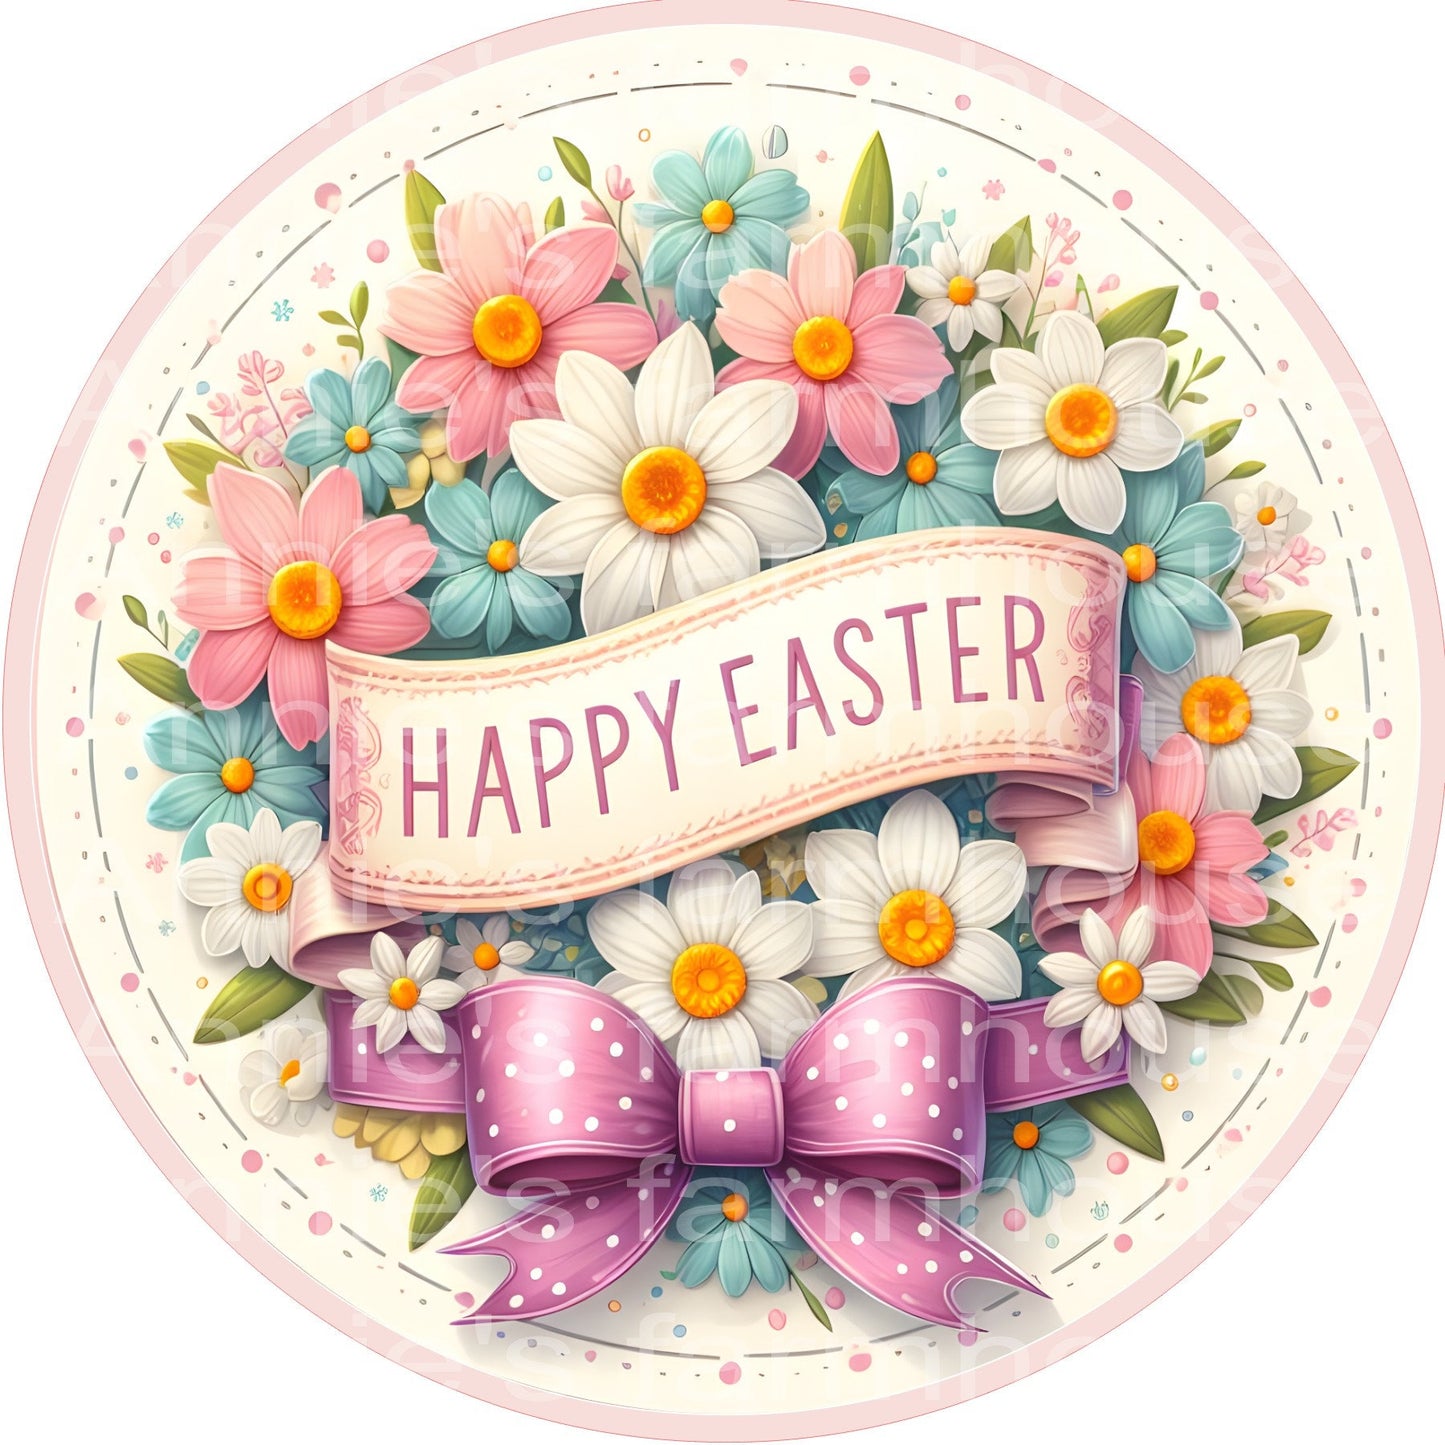 Daffadils Spring Easter sign, happy Easter round metal sign, Wreath sign, Wreath center, attachment, plaque